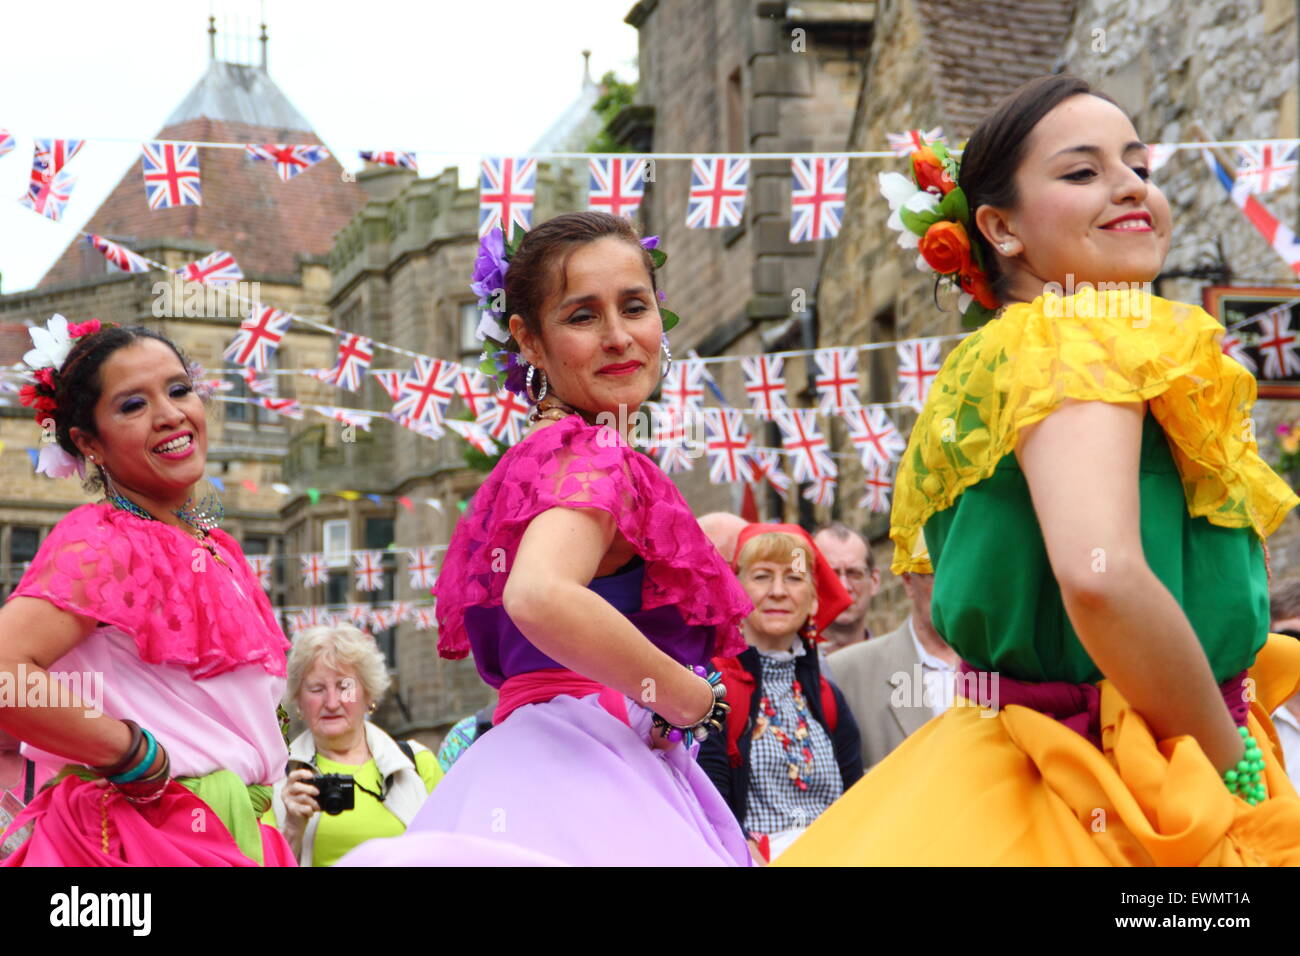 Members of Latin American dance group, Son de America perform at the Bakewell International Day of Dance, Bakewell, England UK Stock Photo